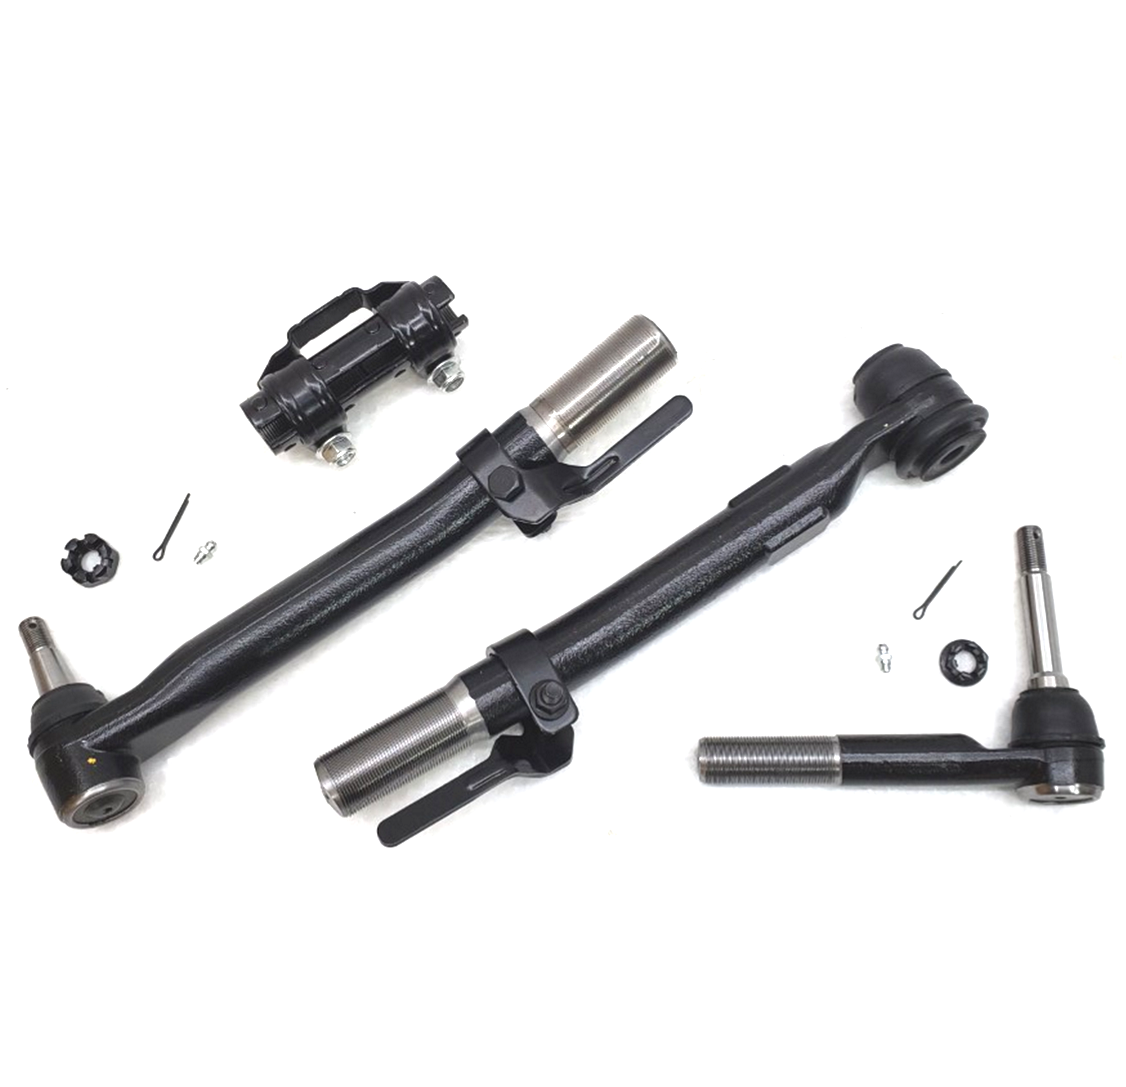 Lifetime Auto Parts Tie Rod Steering Kit for 2017-2019 Ford F250, F350 Super Duty 4x4 Wide Frame